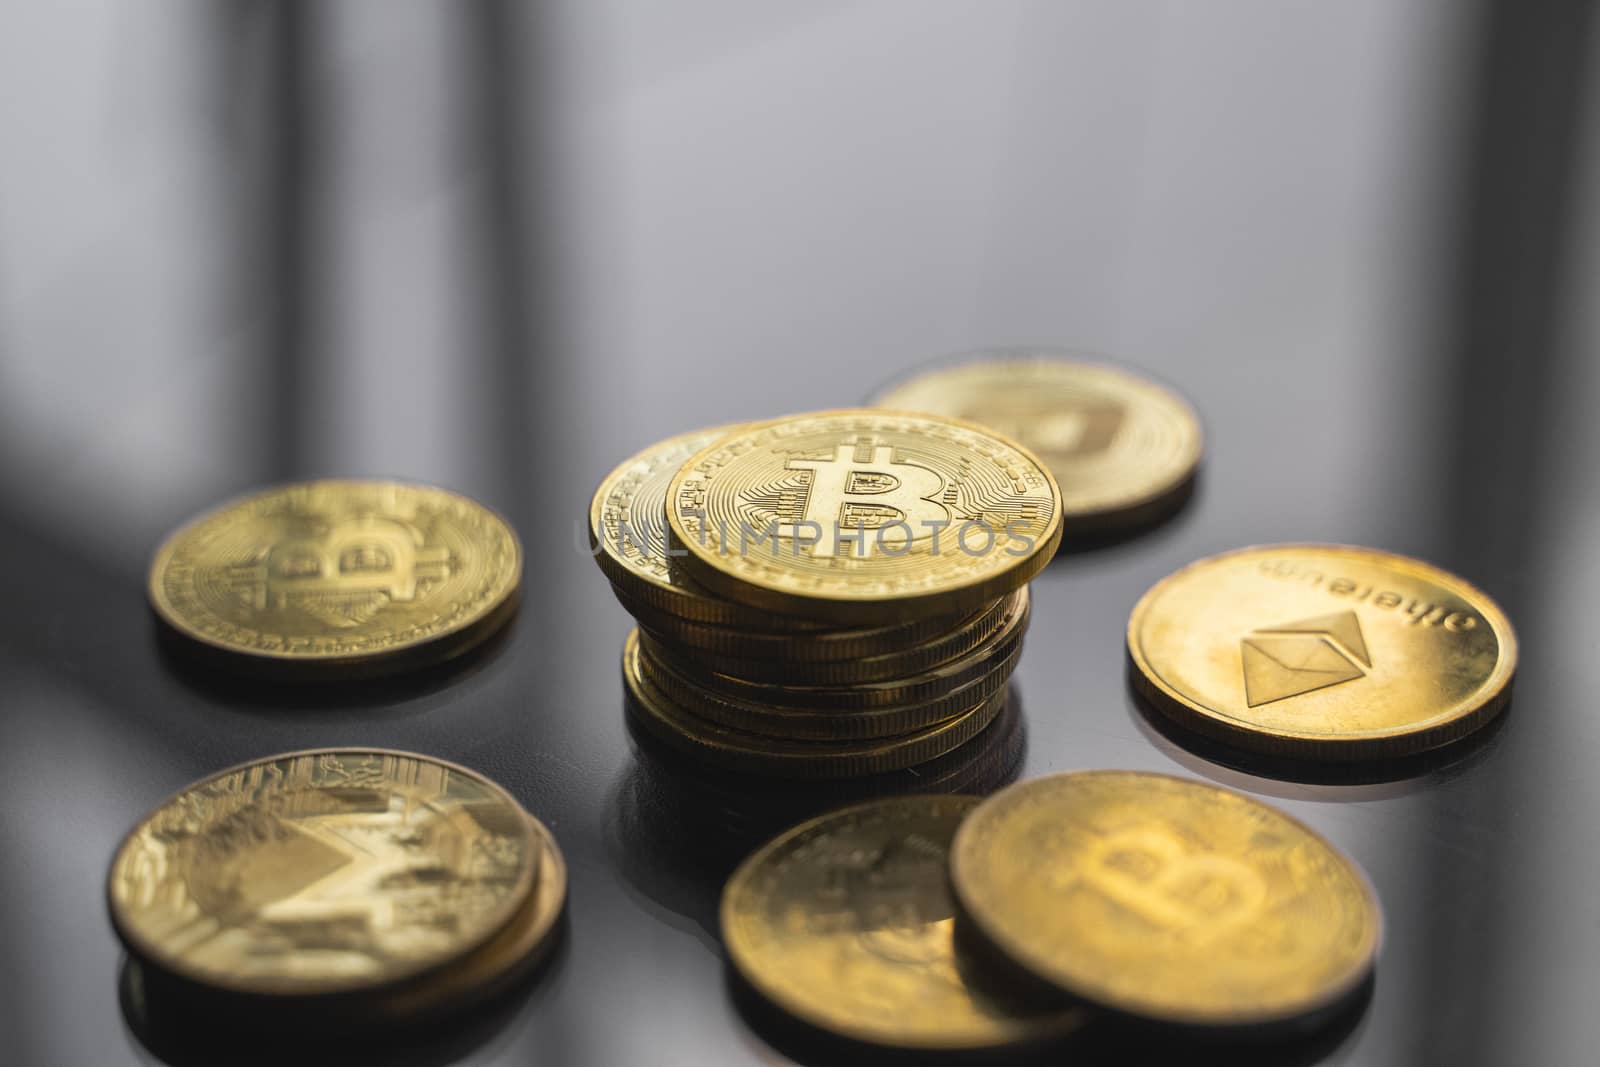 Stacks of golden bitcoin coins on a reflected surface of the table. Virtual cryptocurrency concept. Mining of bitcoins online business. Bitcoins trading